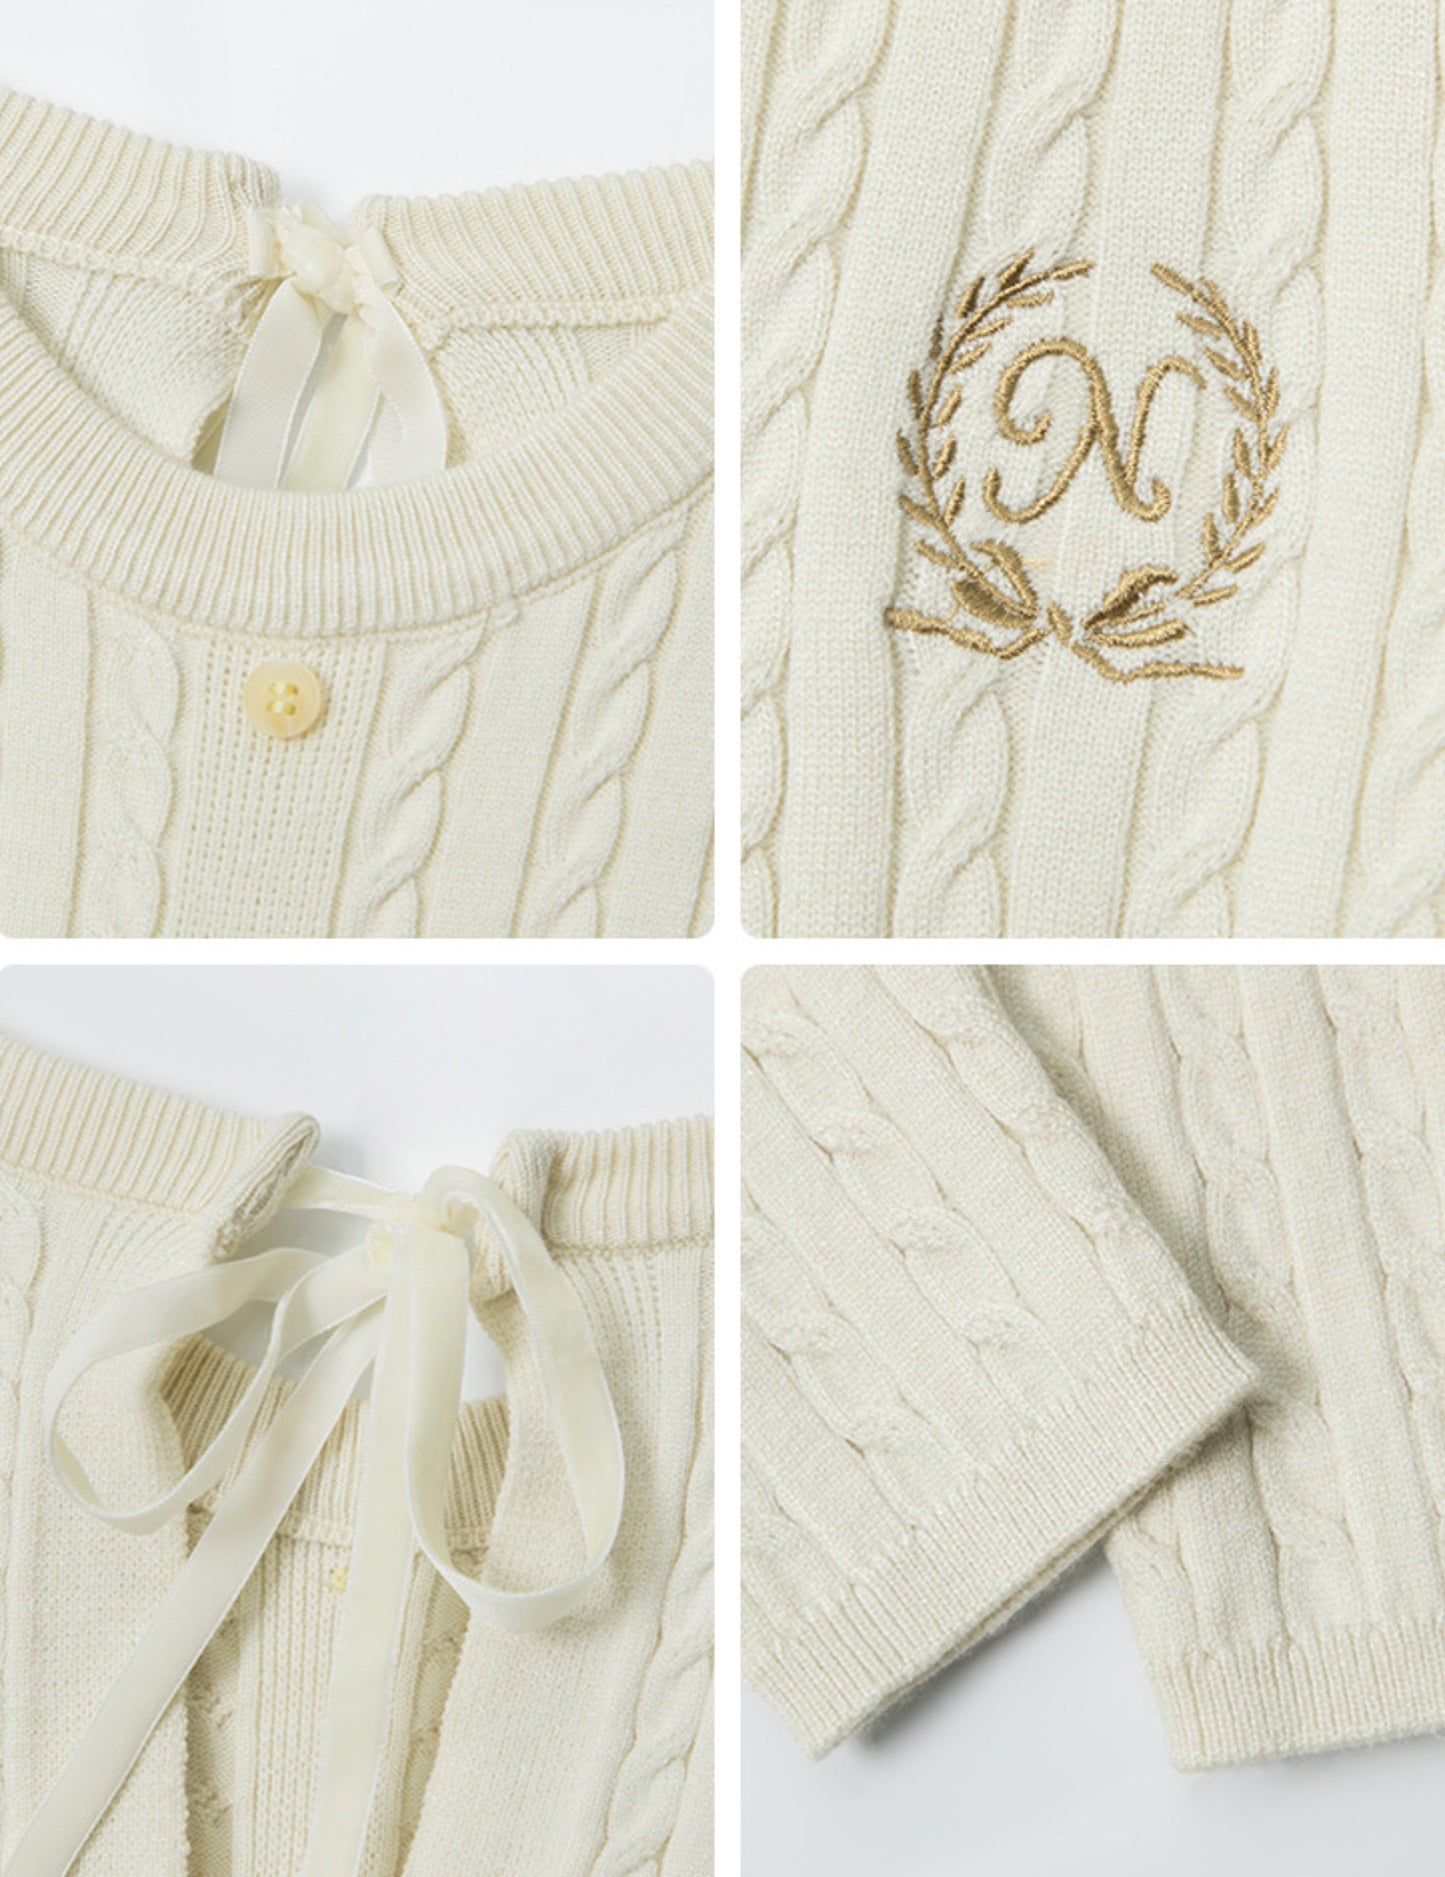 Long-sleeve Cropped Sweater with Embroidered Emblem and Tie-back Design